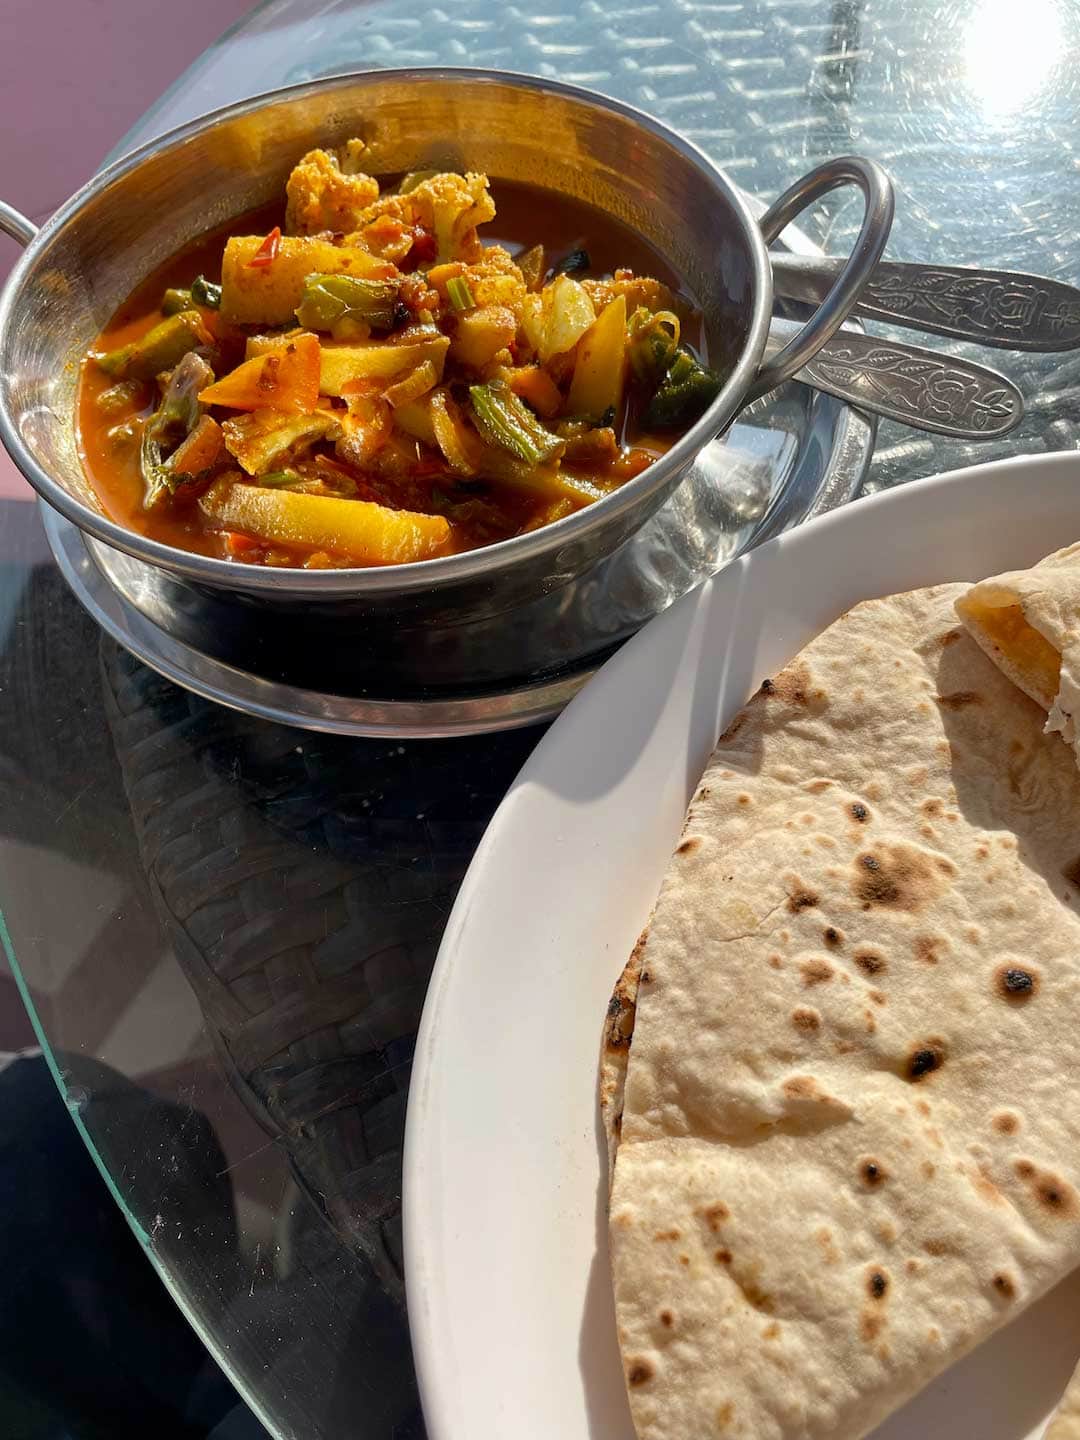 Food in Nepal. Veg Curry and nann